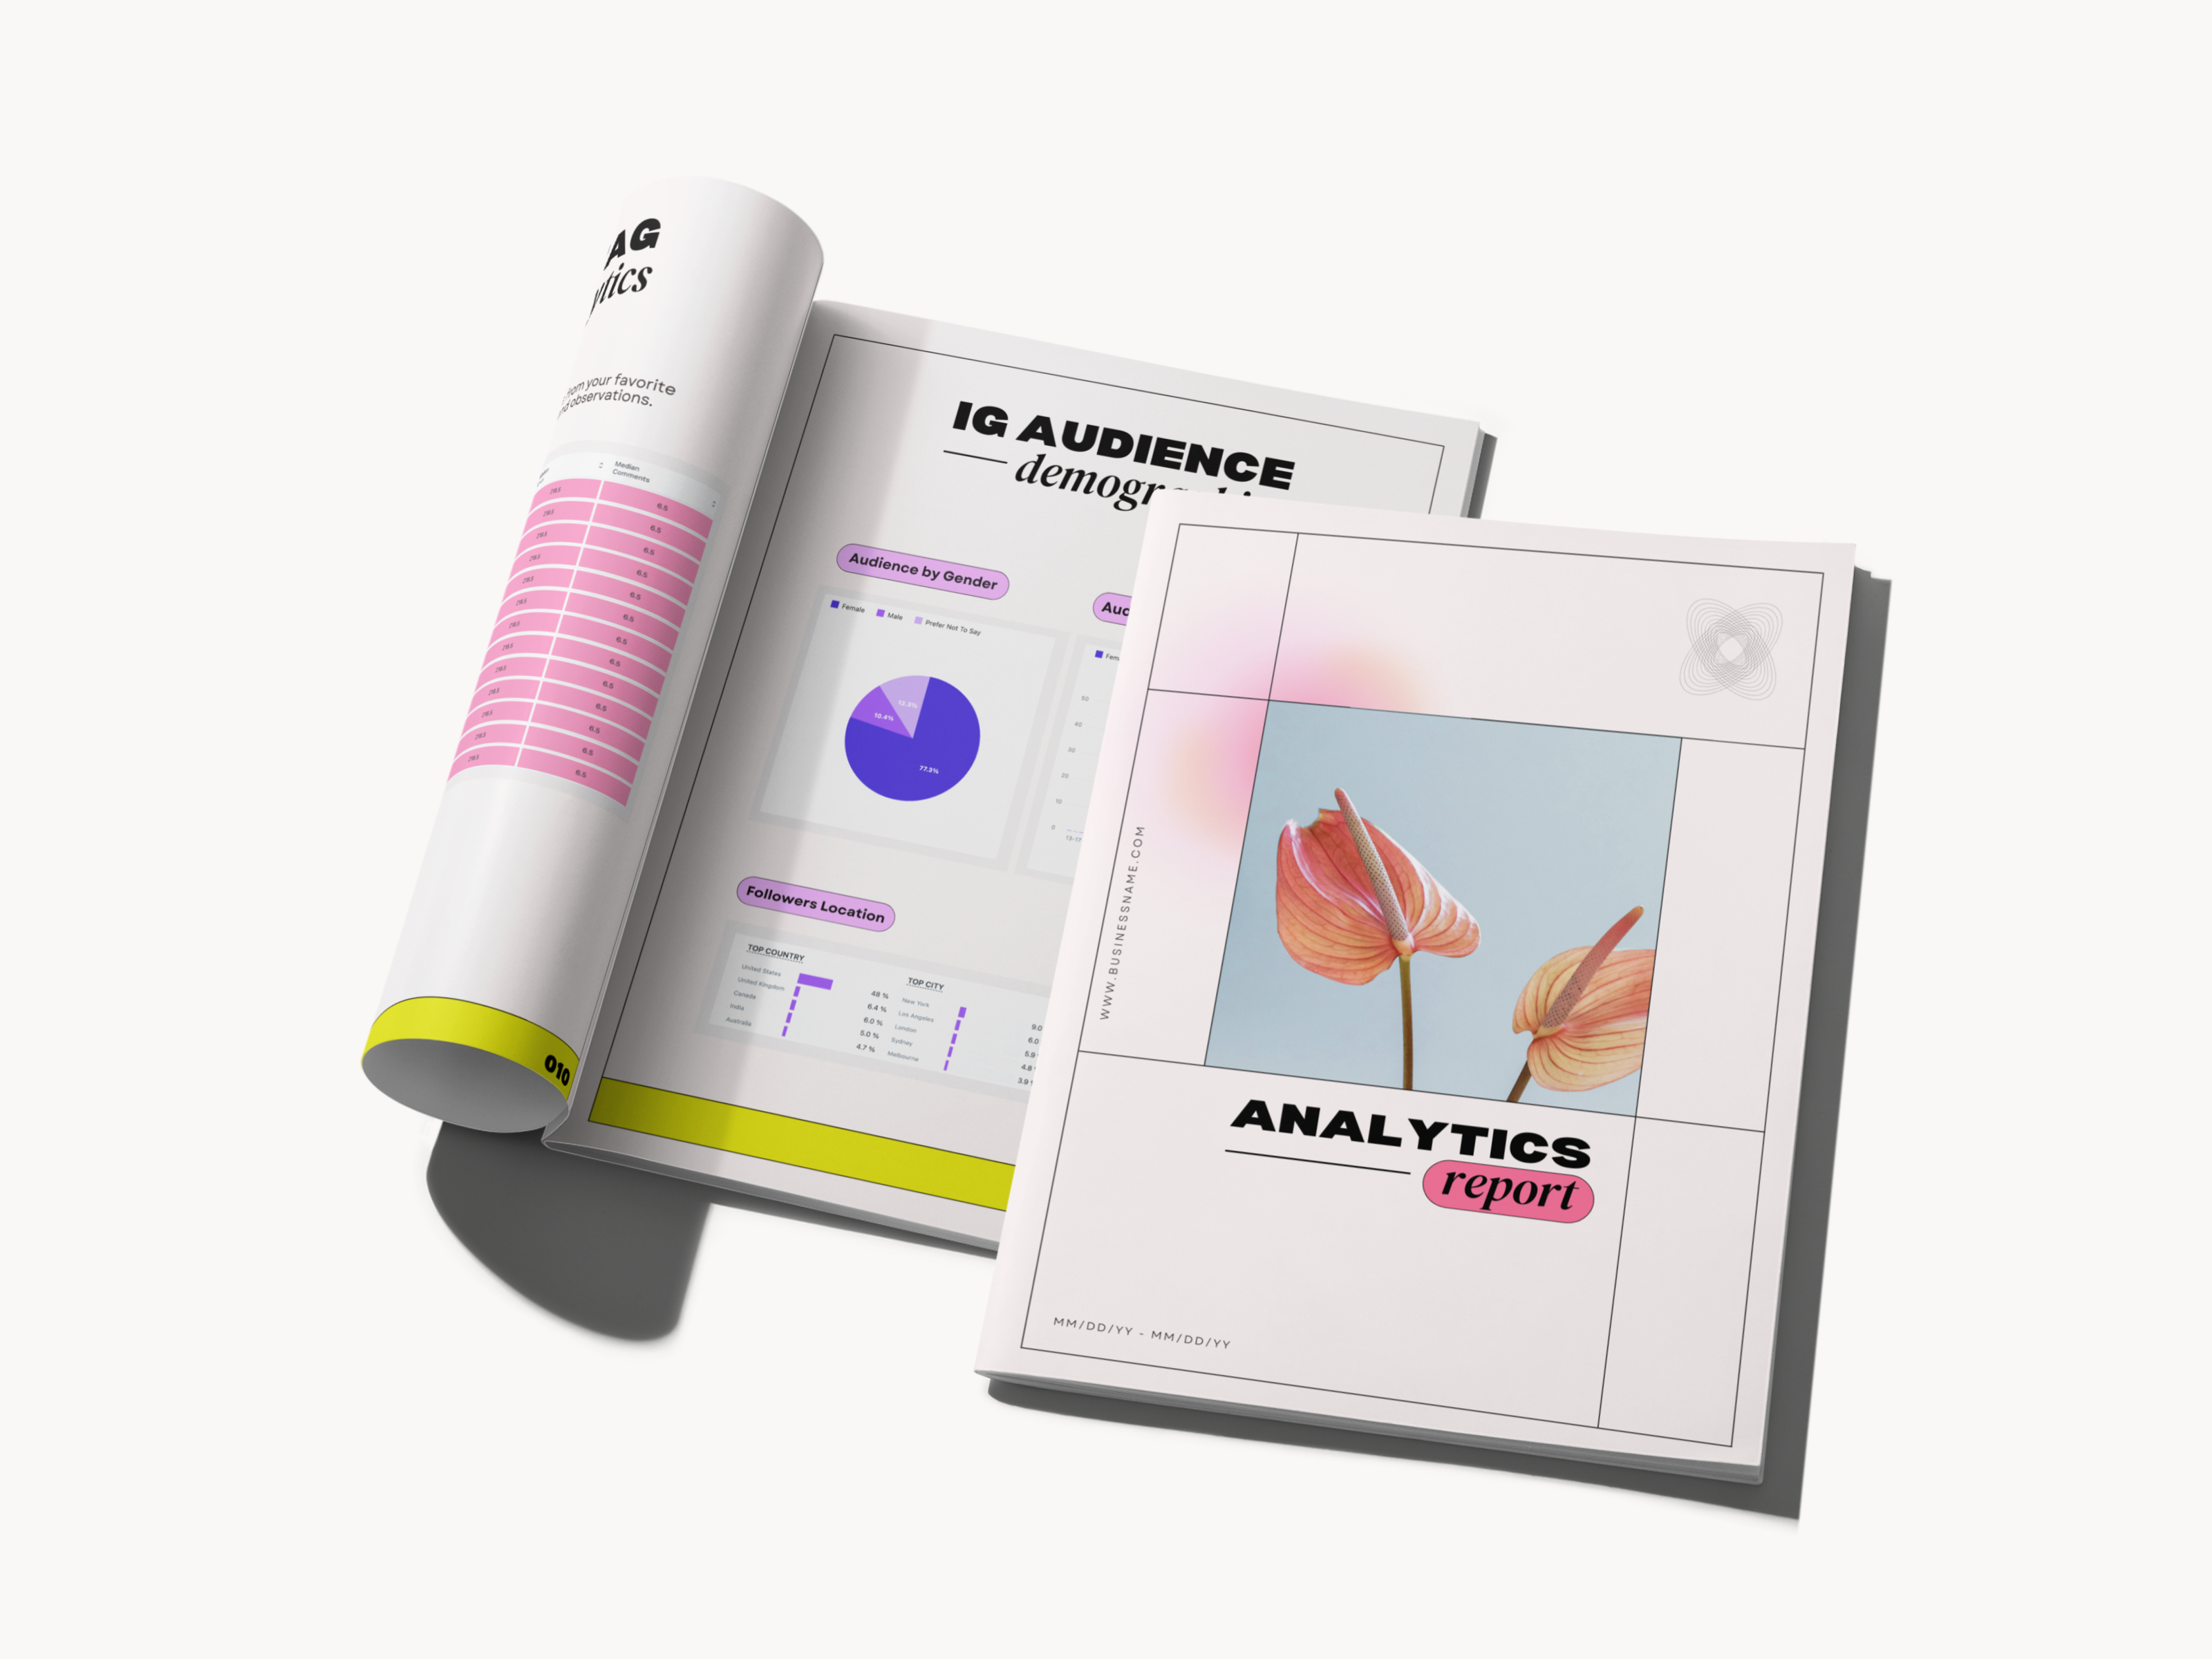 Analytics Report Template - In Living Color